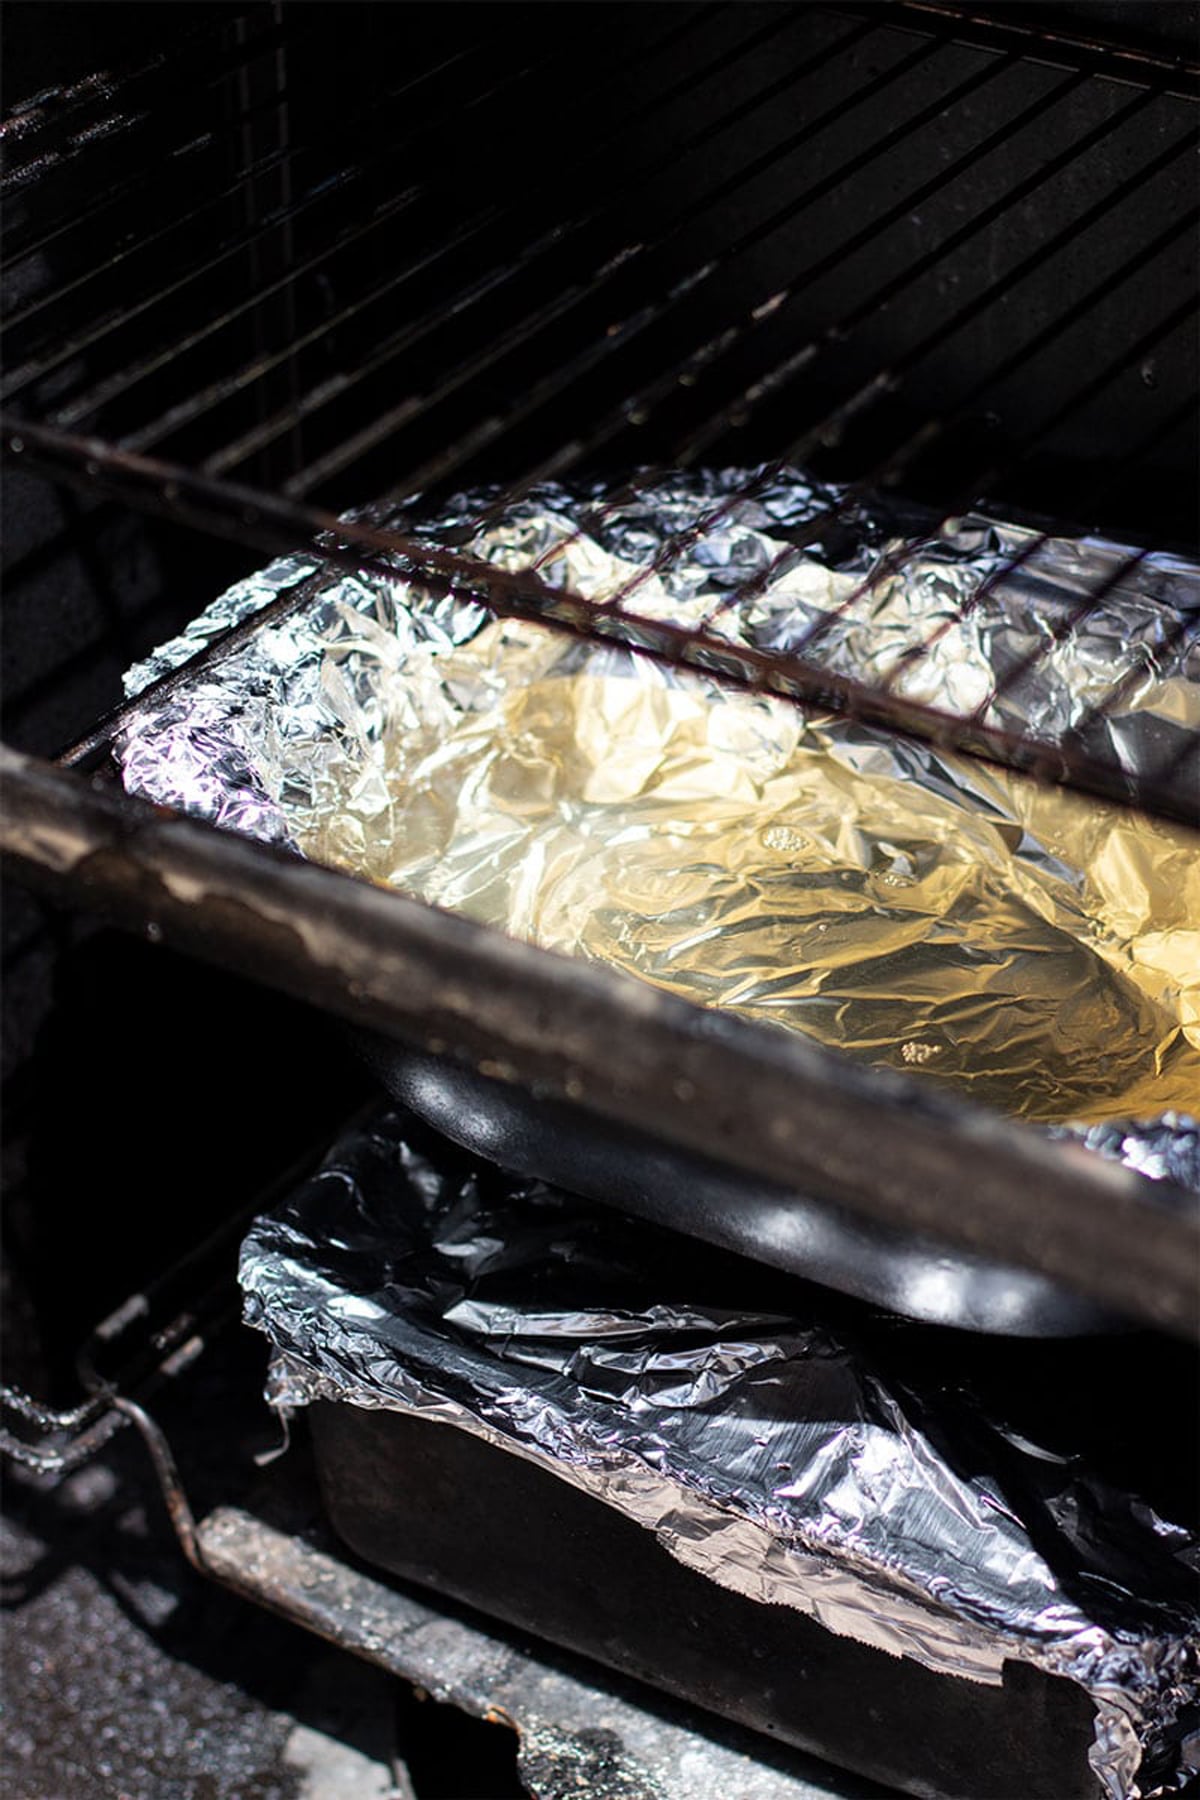 Water pan covered in aluminum foil placed inside a smoker.